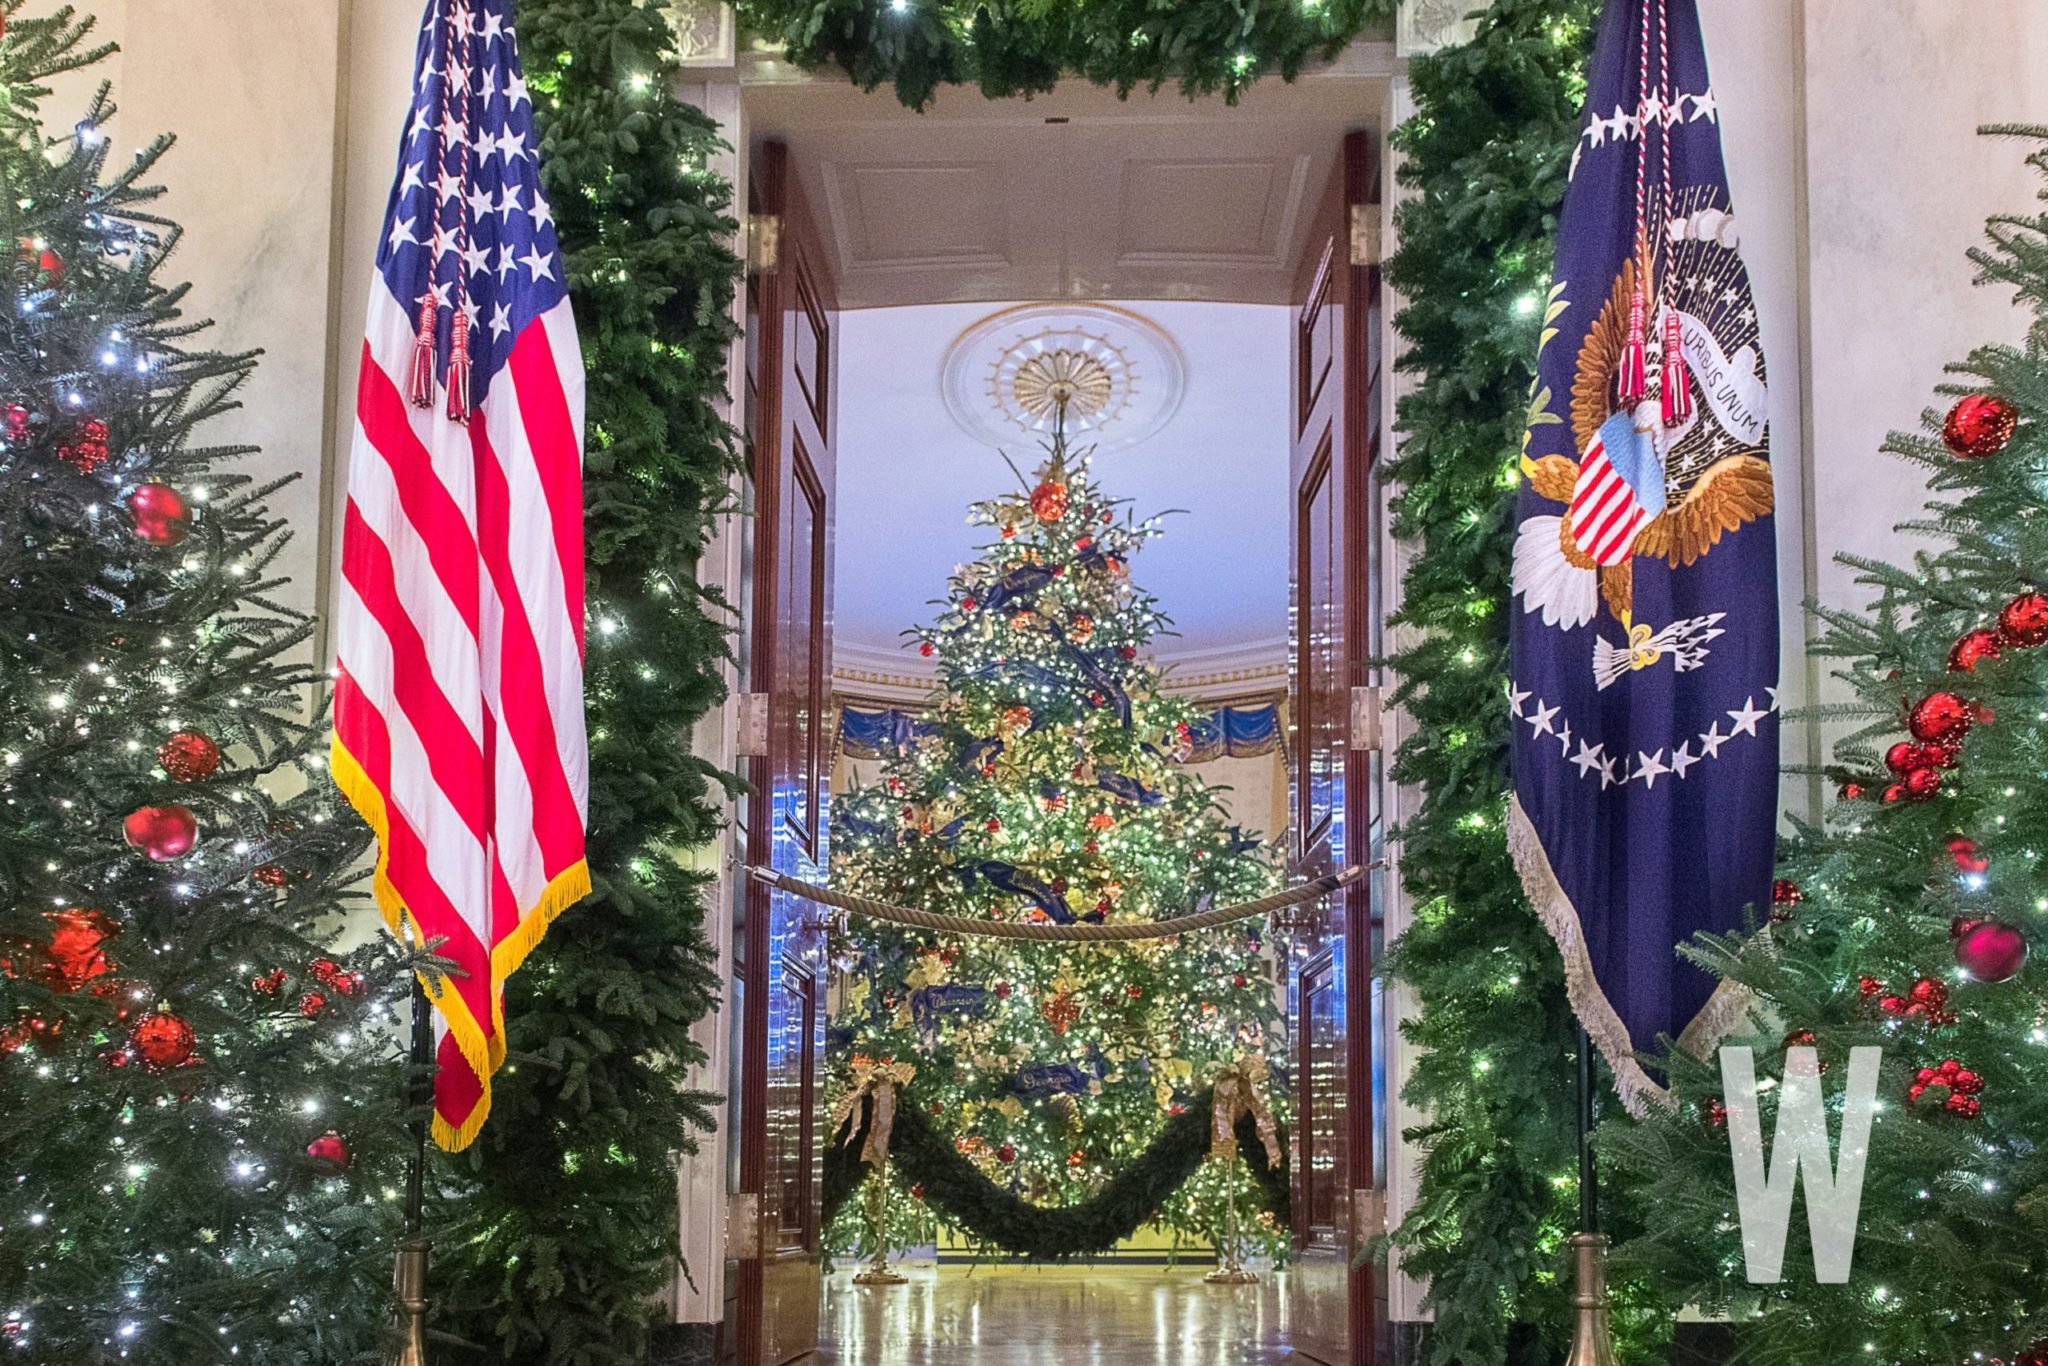 PHOTOS: The 2018 White House Christmas Decorations